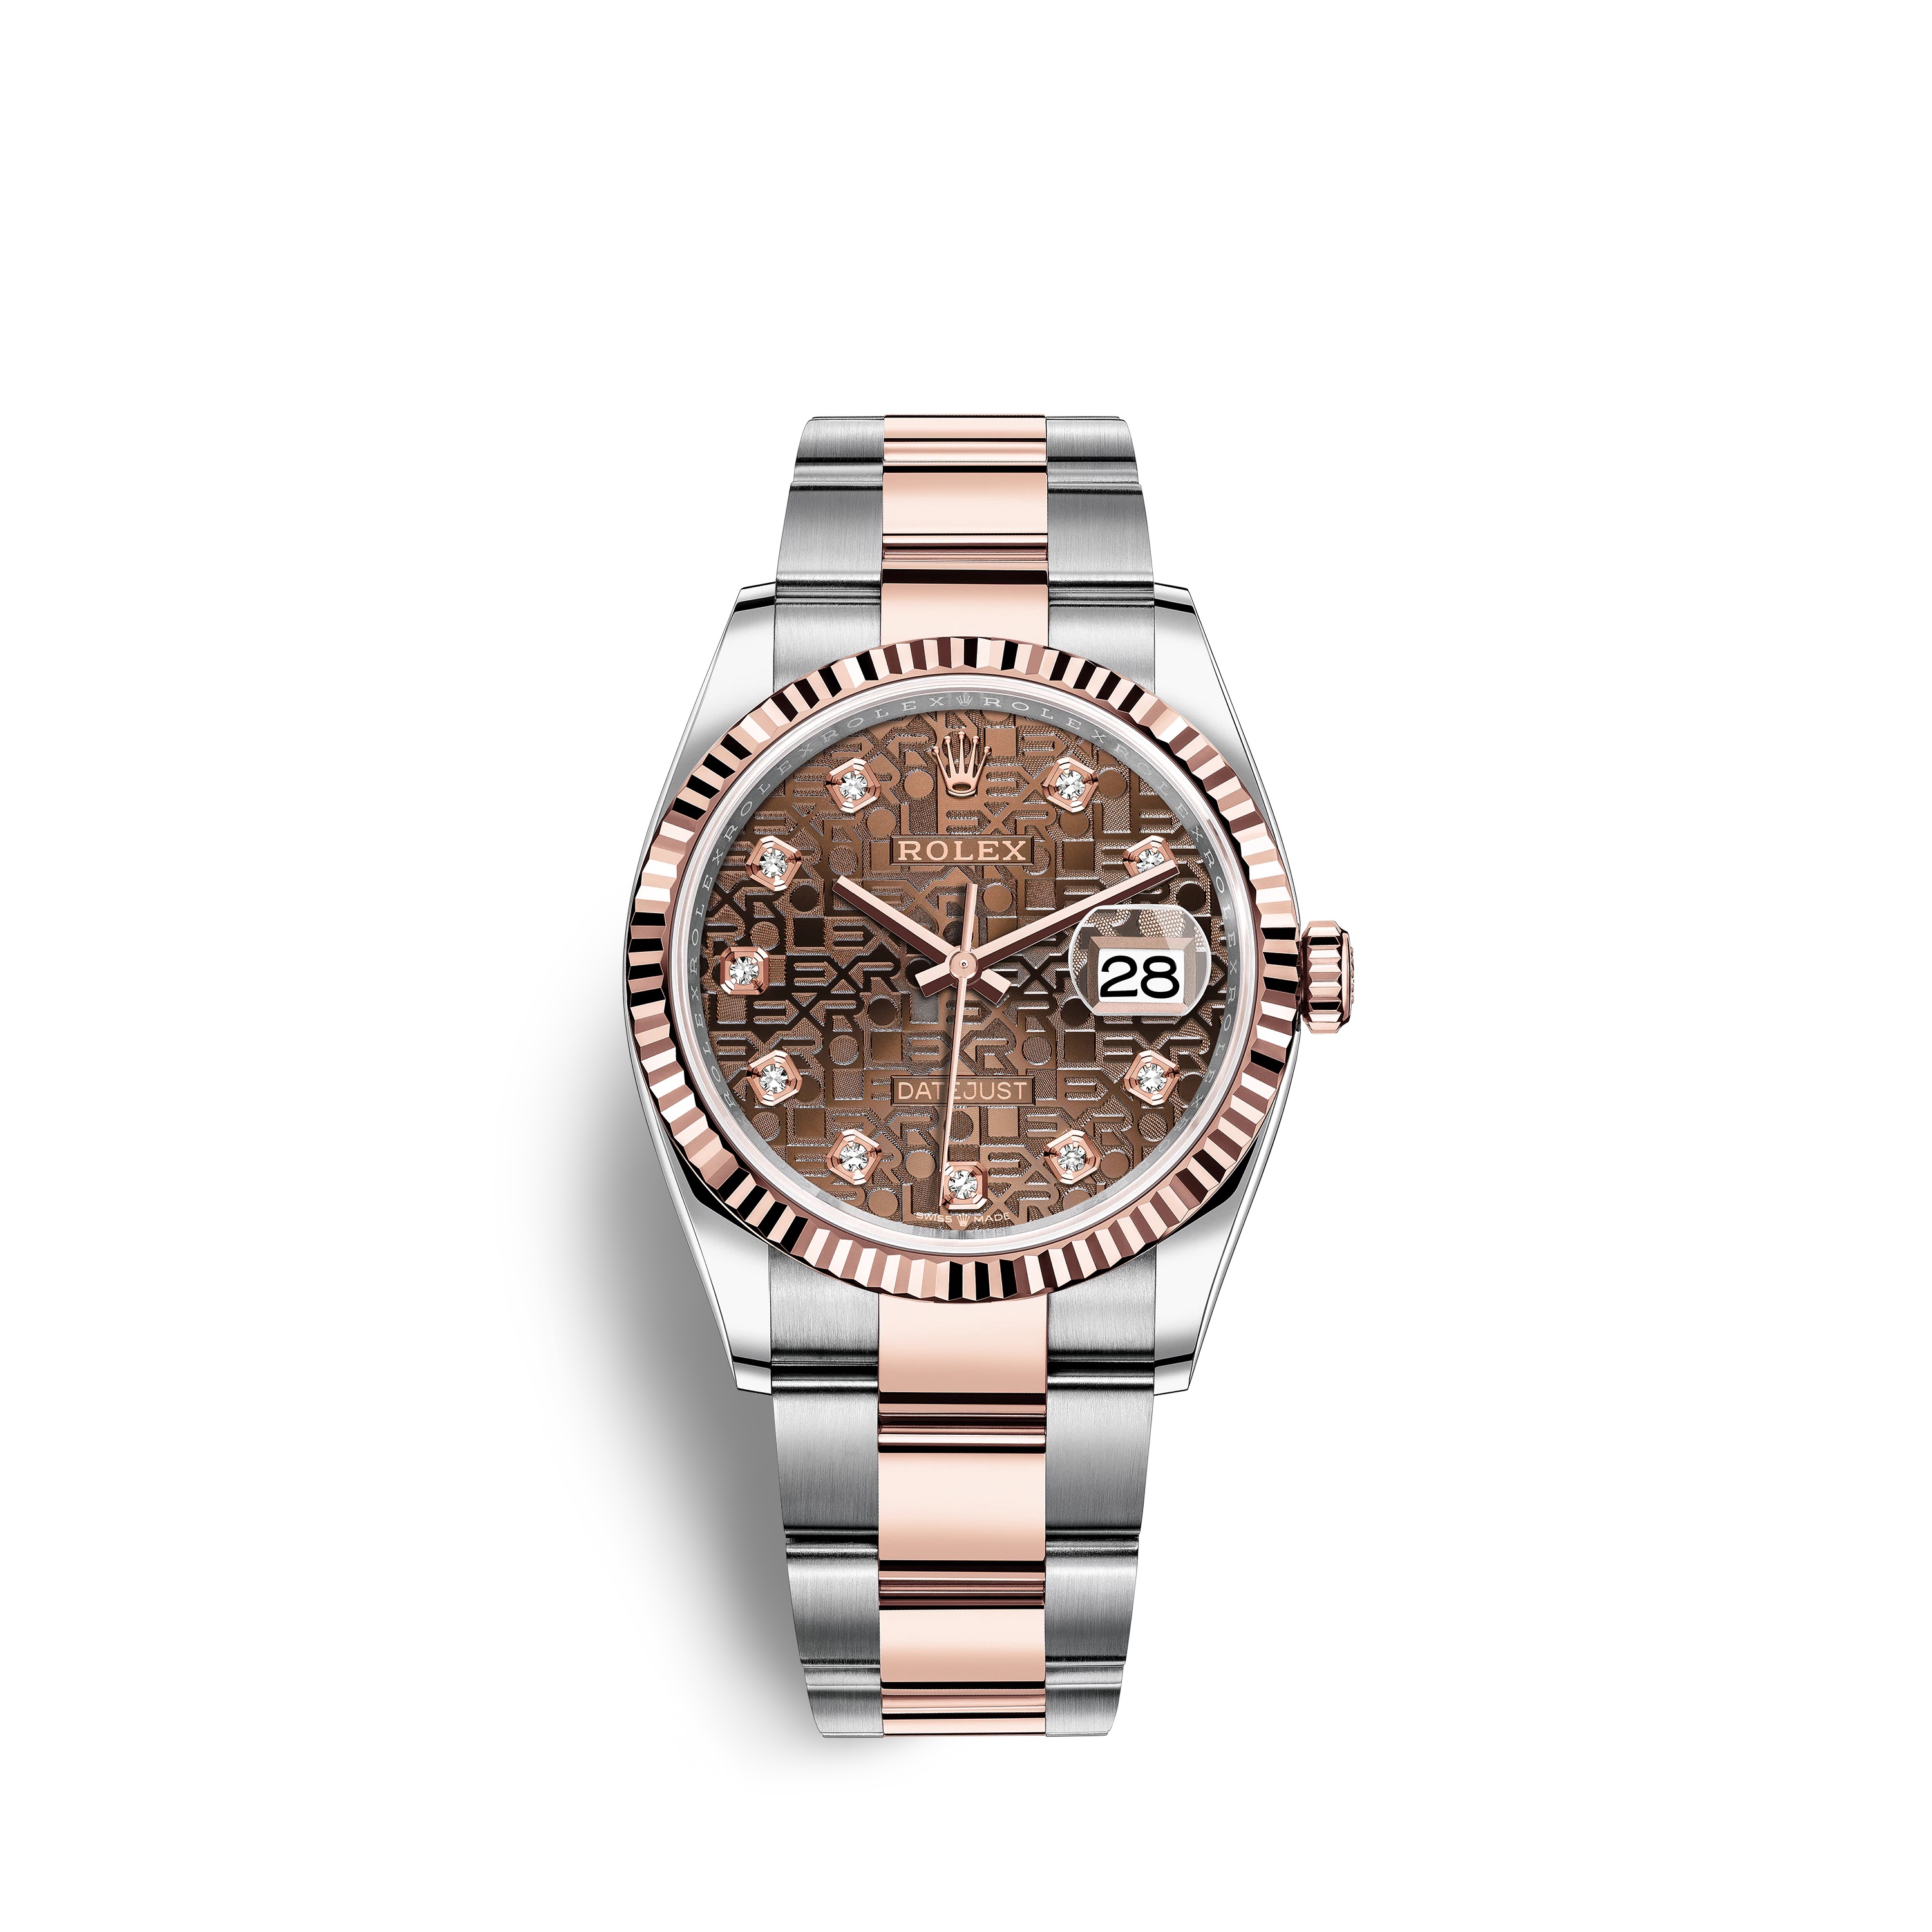 Datejust 36 126231 Rose Gold & Stainless Steel Watch (Chocolate Jubilee Design Set with Diamonds) - Click Image to Close